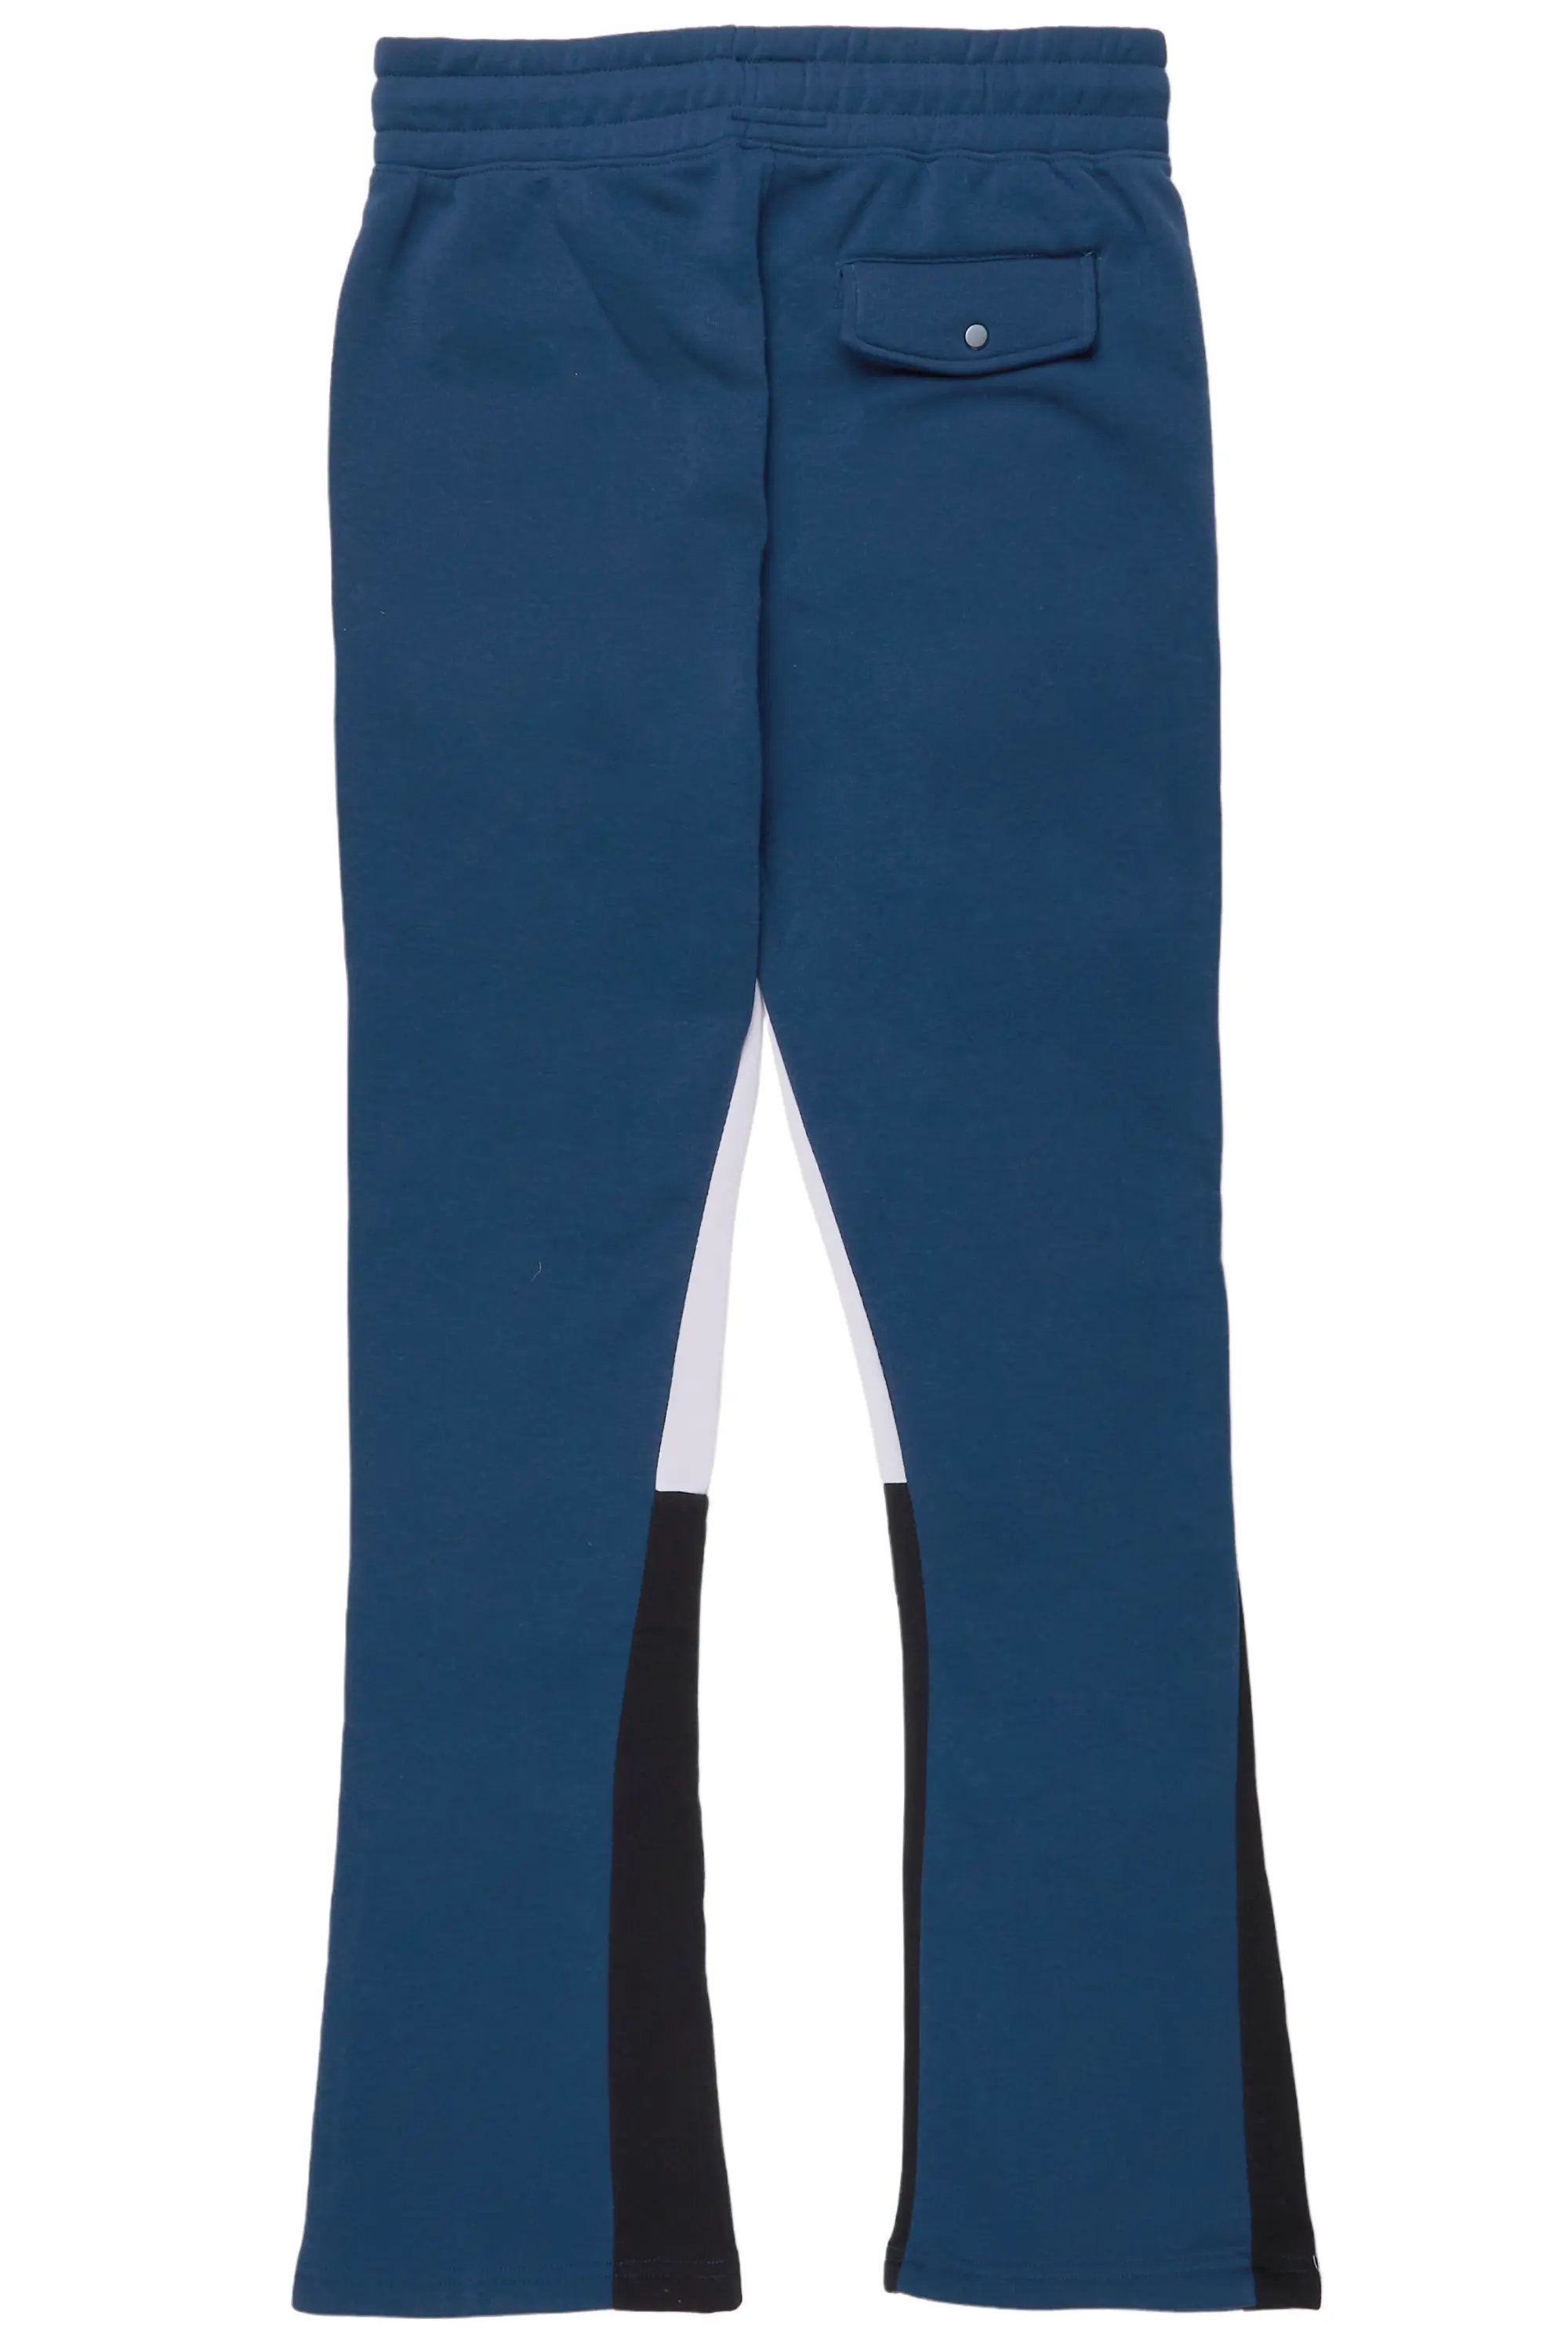 Buy Men's Track Pant/Night Pant Navy Blue Online In India At Discounted  Prices